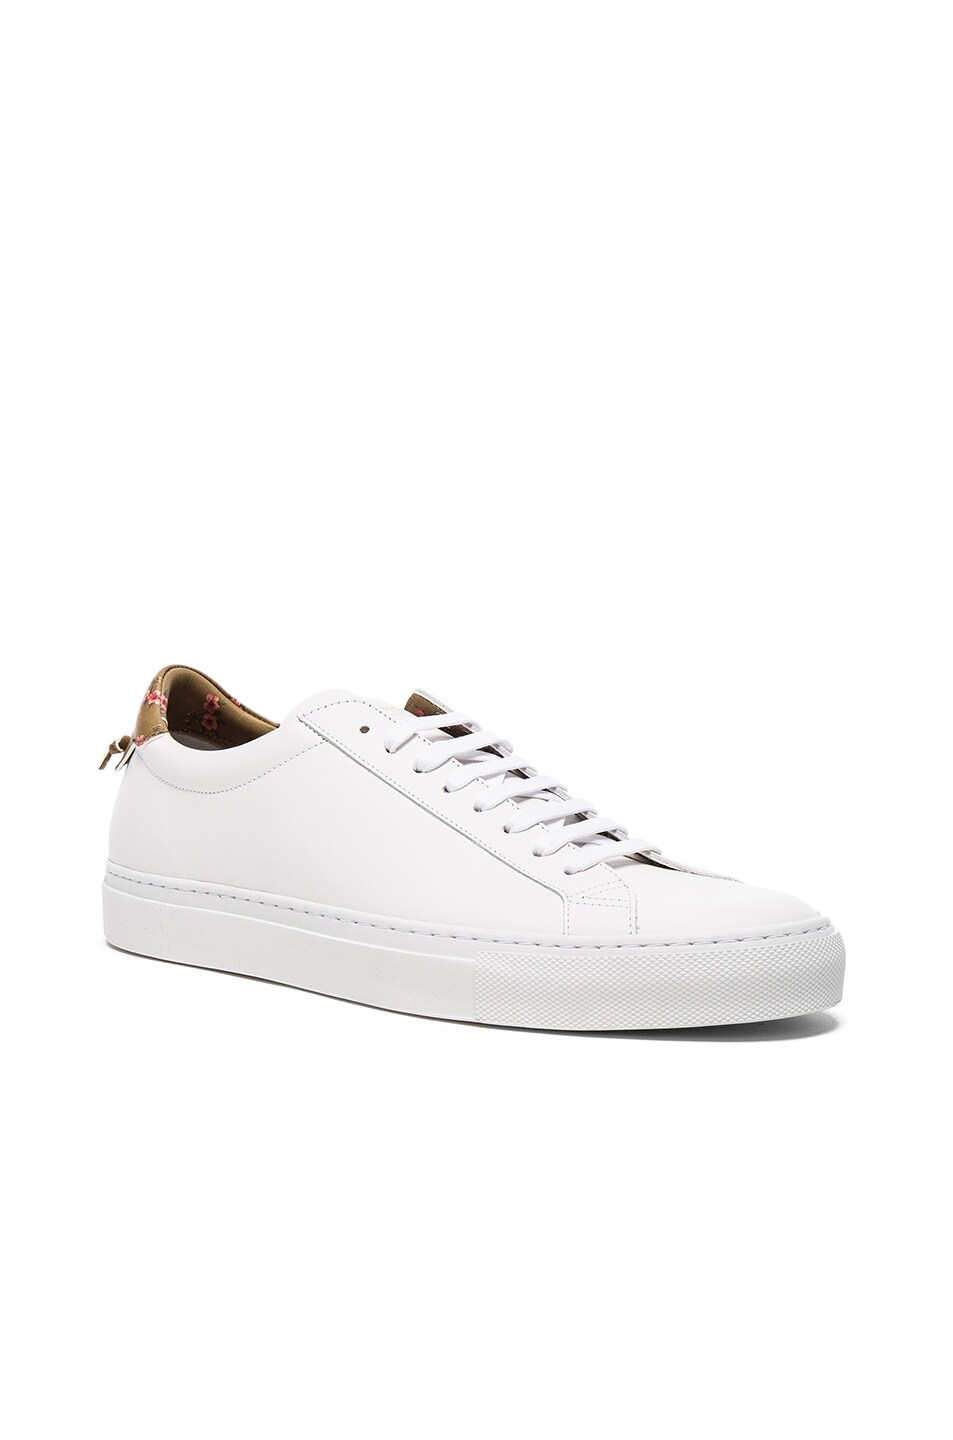 Image 1 of Givenchy Leather Knots Urban Low Floral Print Sneakers in White & Beige